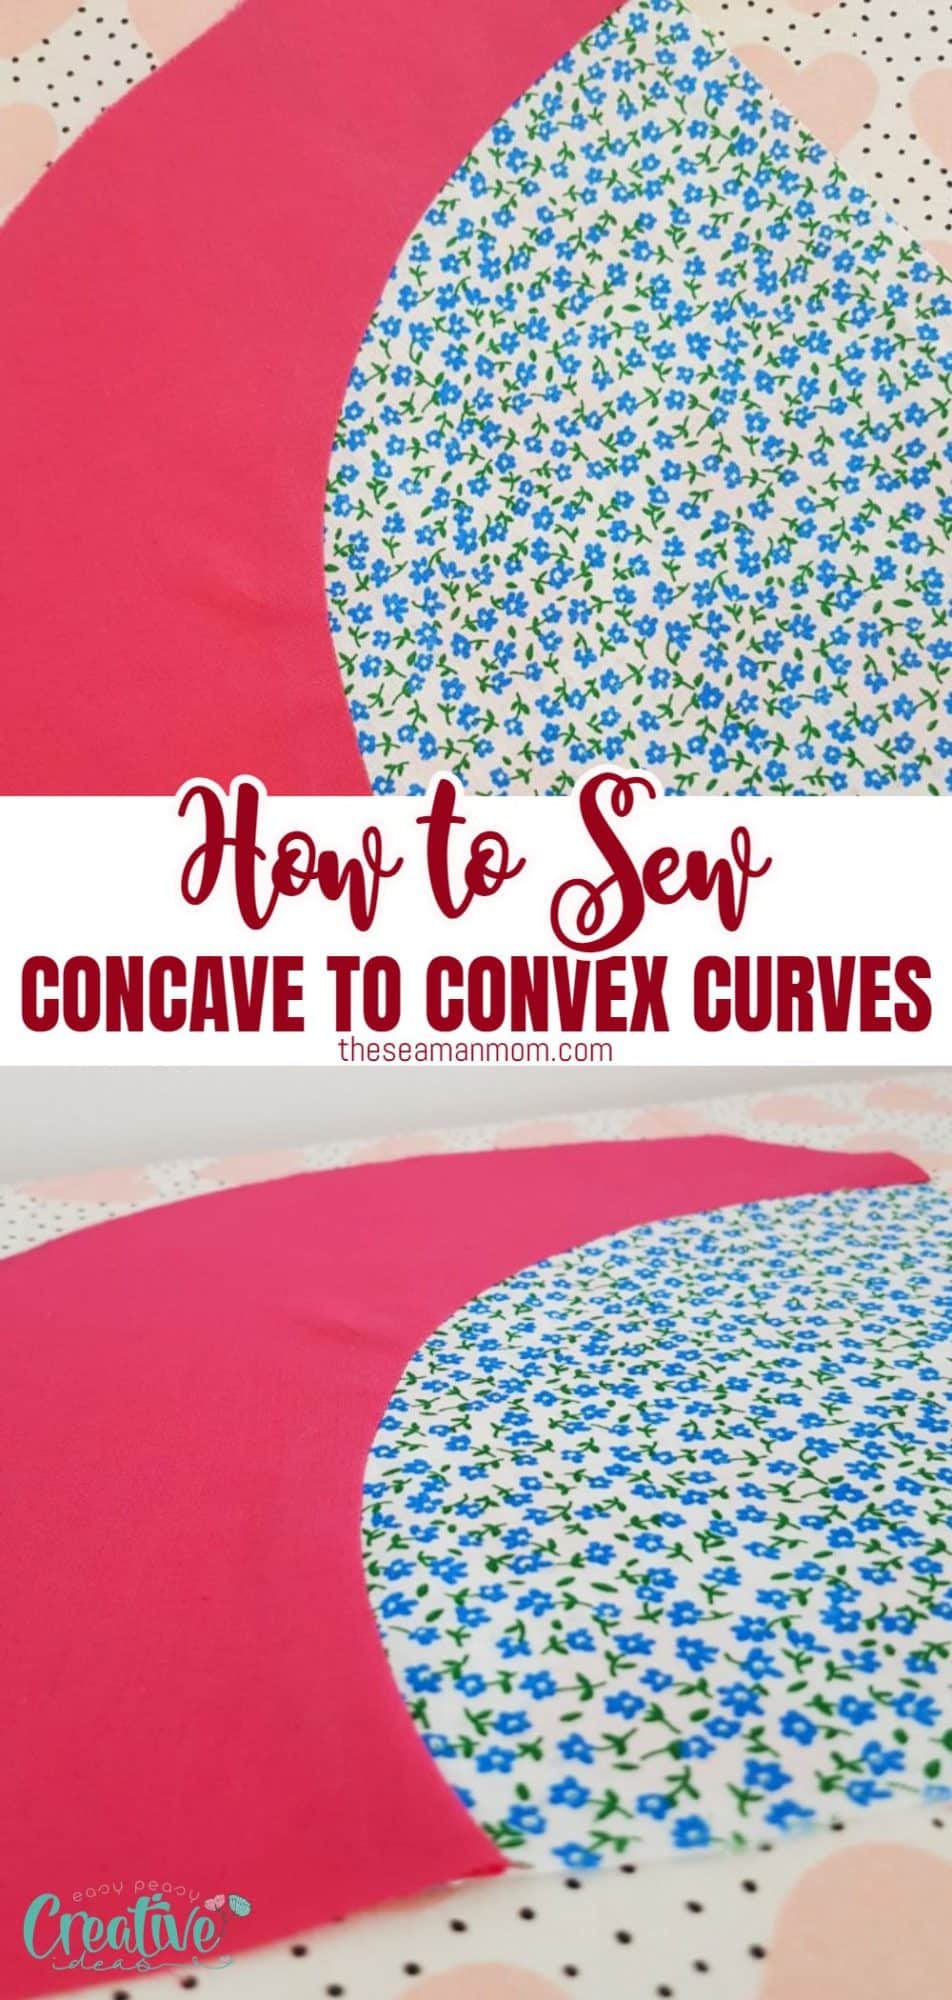 Sewing curves - tips for sewing concave and convex curves together